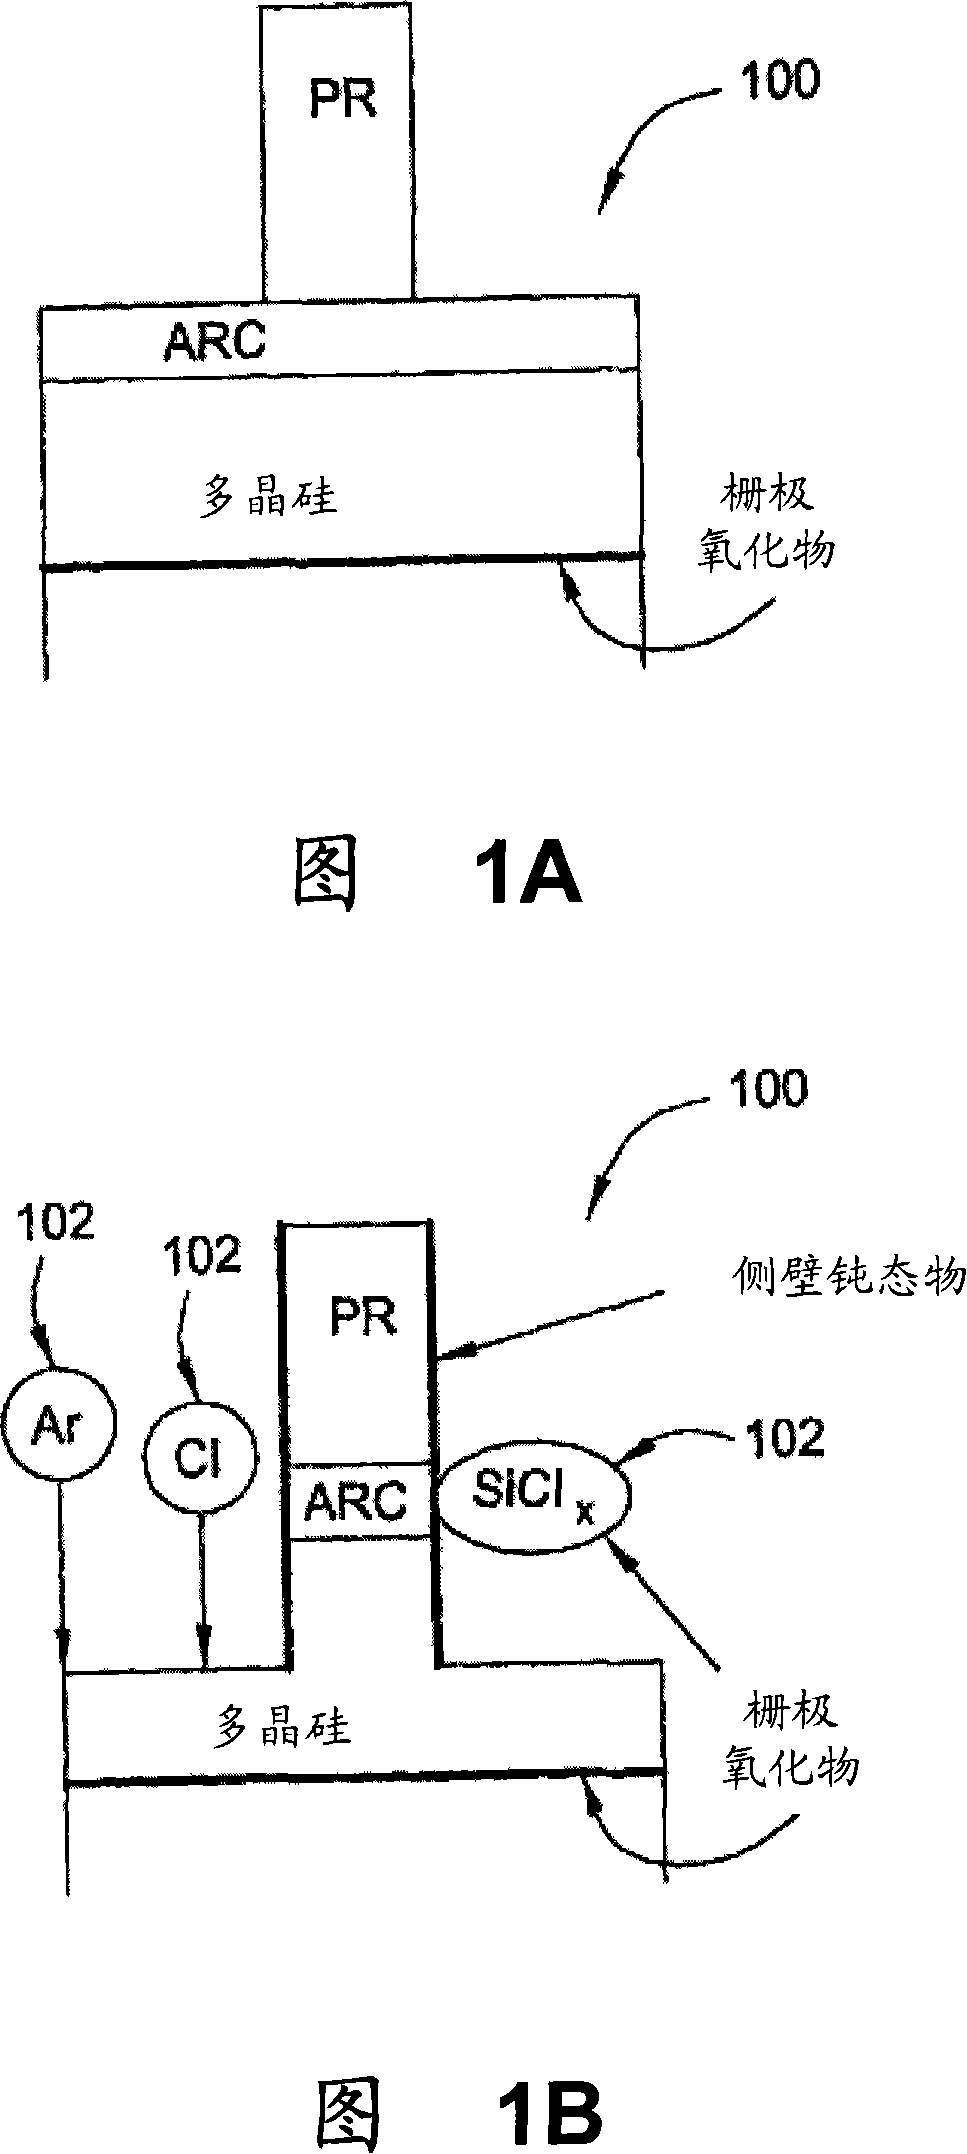 Method for etching having a controlled distribution of process results